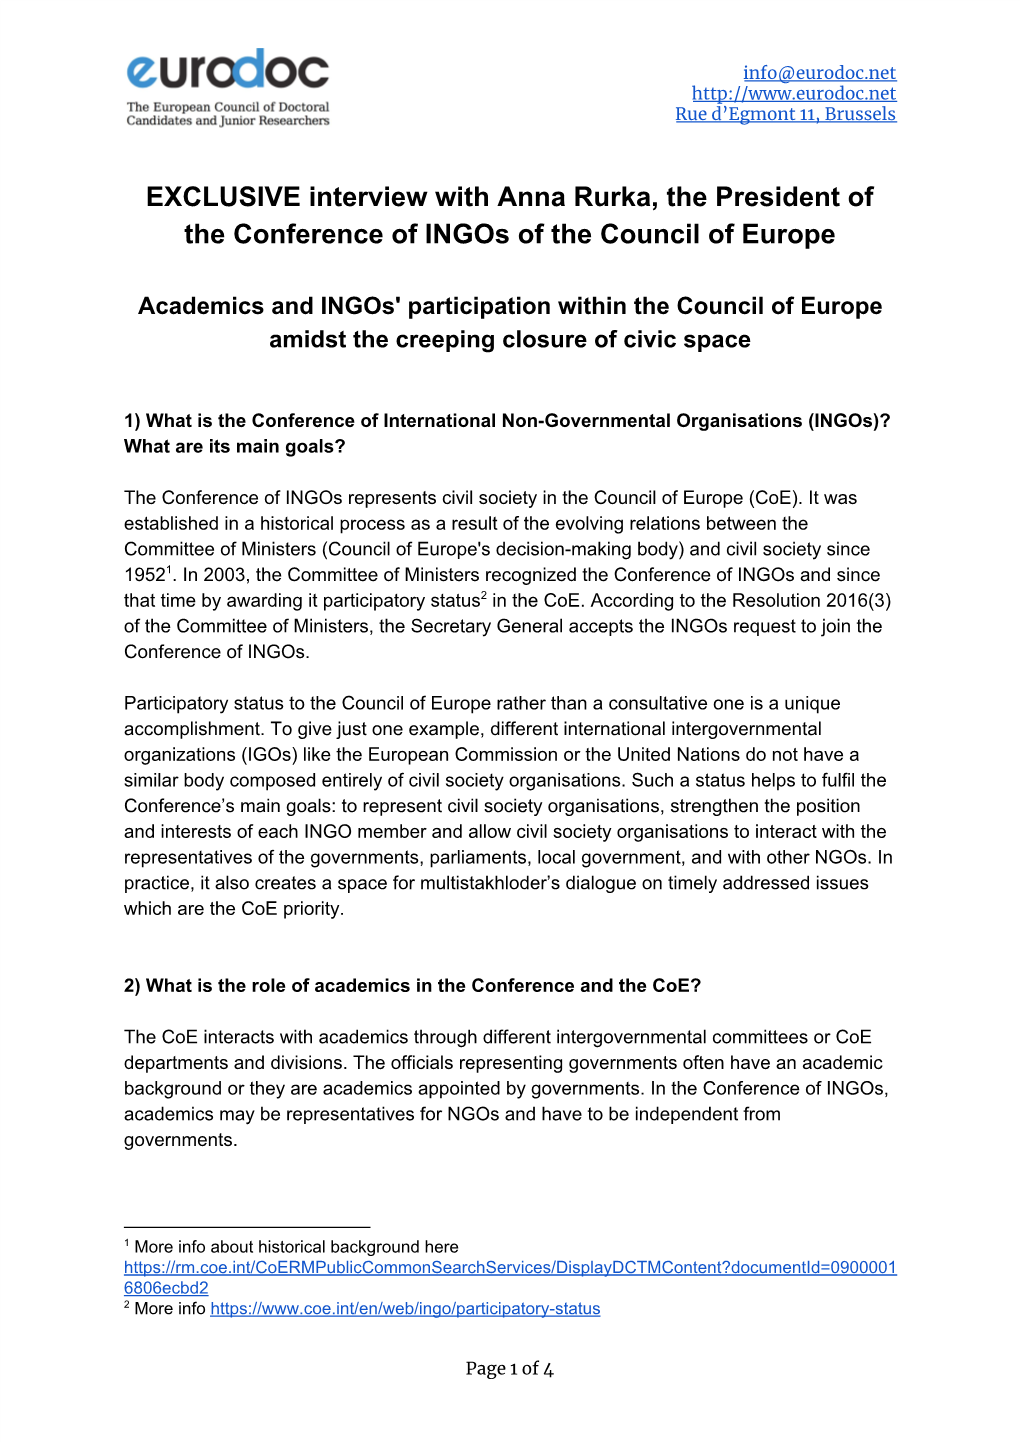 EXCLUSIVE Interview with Anna Rurka, the President of the Conference of Ingos of the Council of Europe